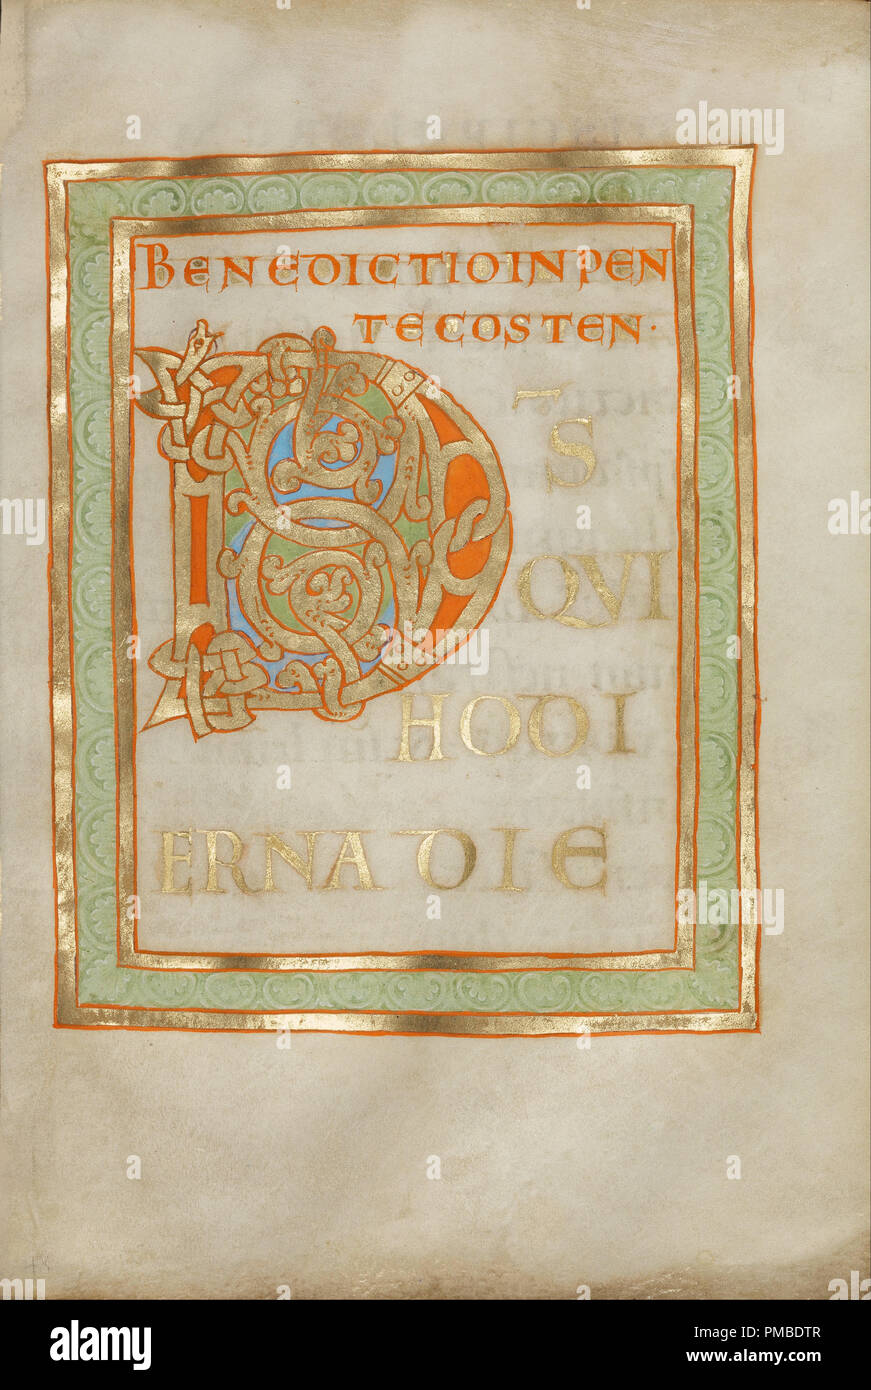 Decorated Incipit Page. Date/Period: 1030/1040. Tempera colors, gold leaf, and ink on parchment. Width: 16 cm. Height: 23.2 cm. Author: UNKNOWN. Stock Photo